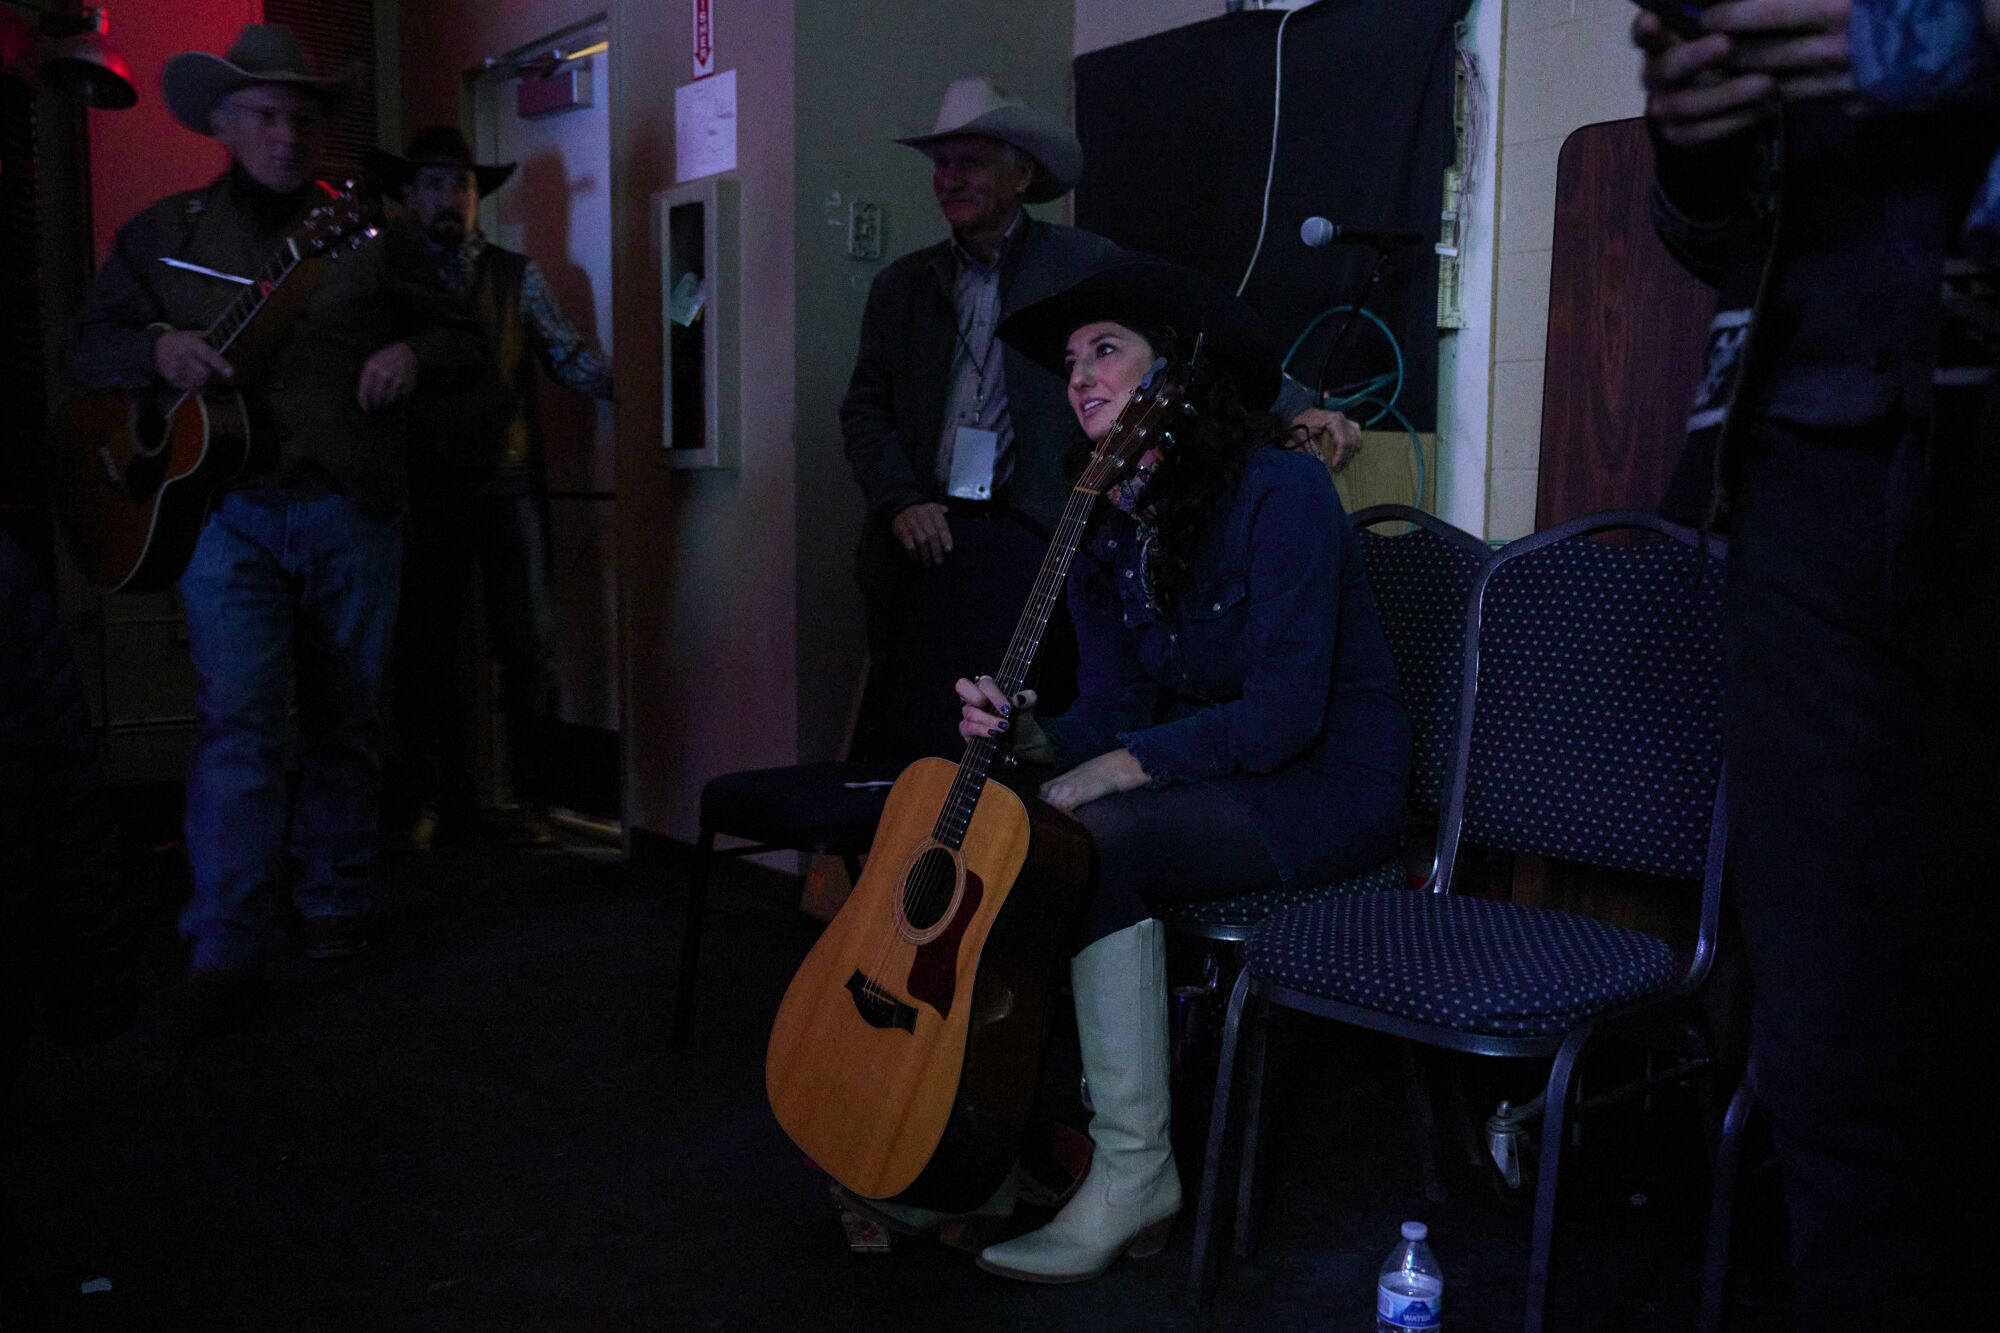 Jessie Veeder waits backstage prior to performing during the National Cowboy Poetry Gathering.